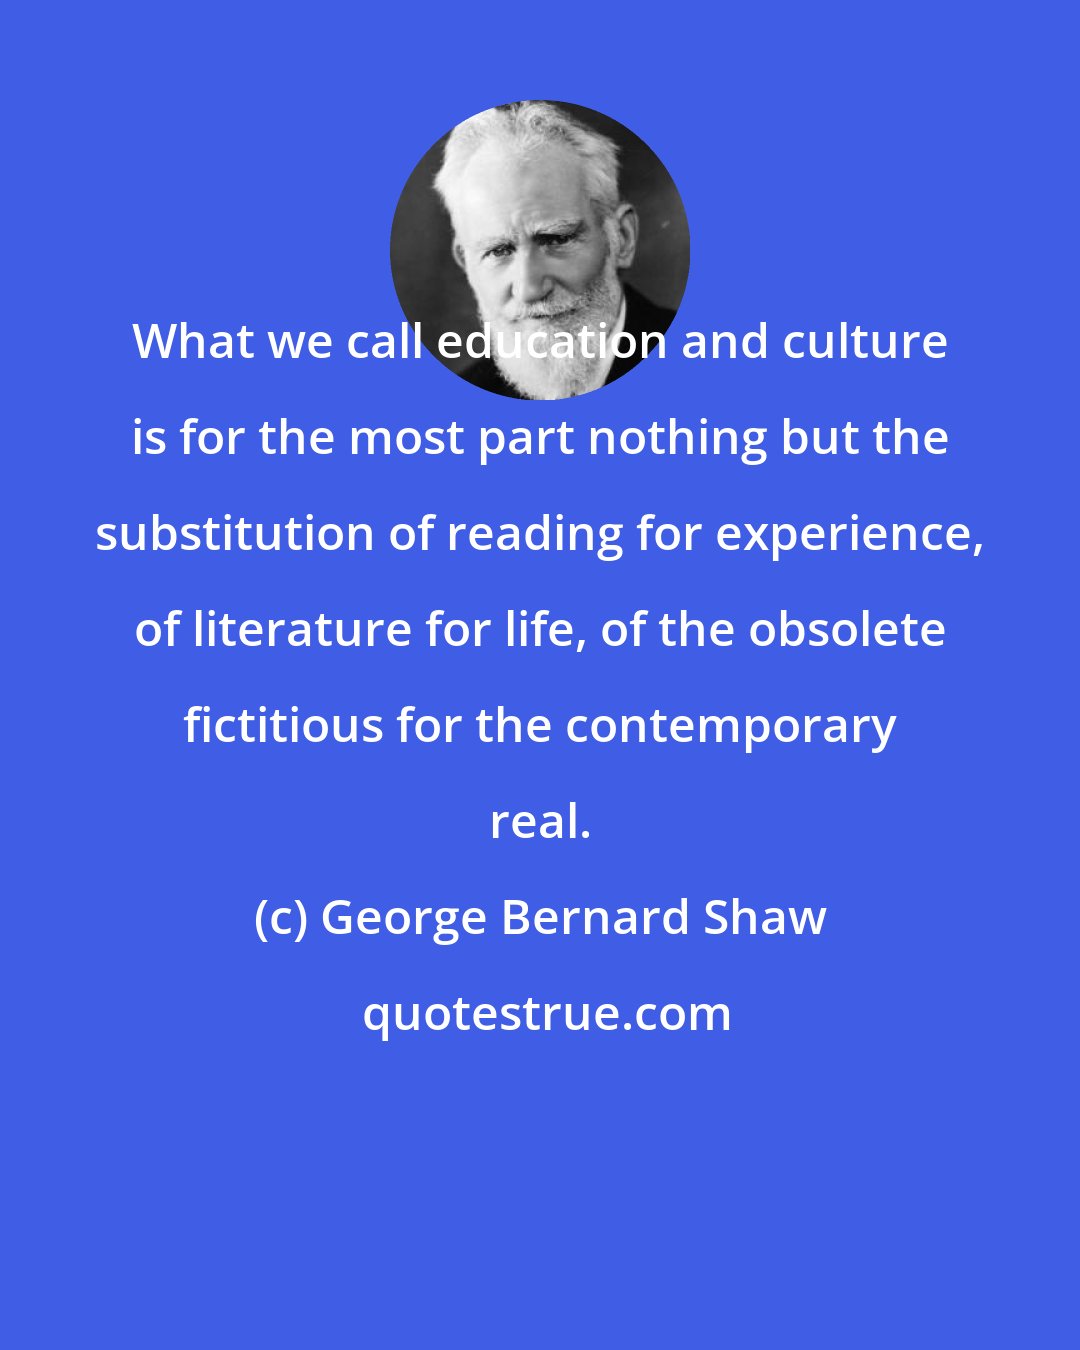 George Bernard Shaw: What we call education and culture is for the most part nothing but the substitution of reading for experience, of literature for life, of the obsolete fictitious for the contemporary real.